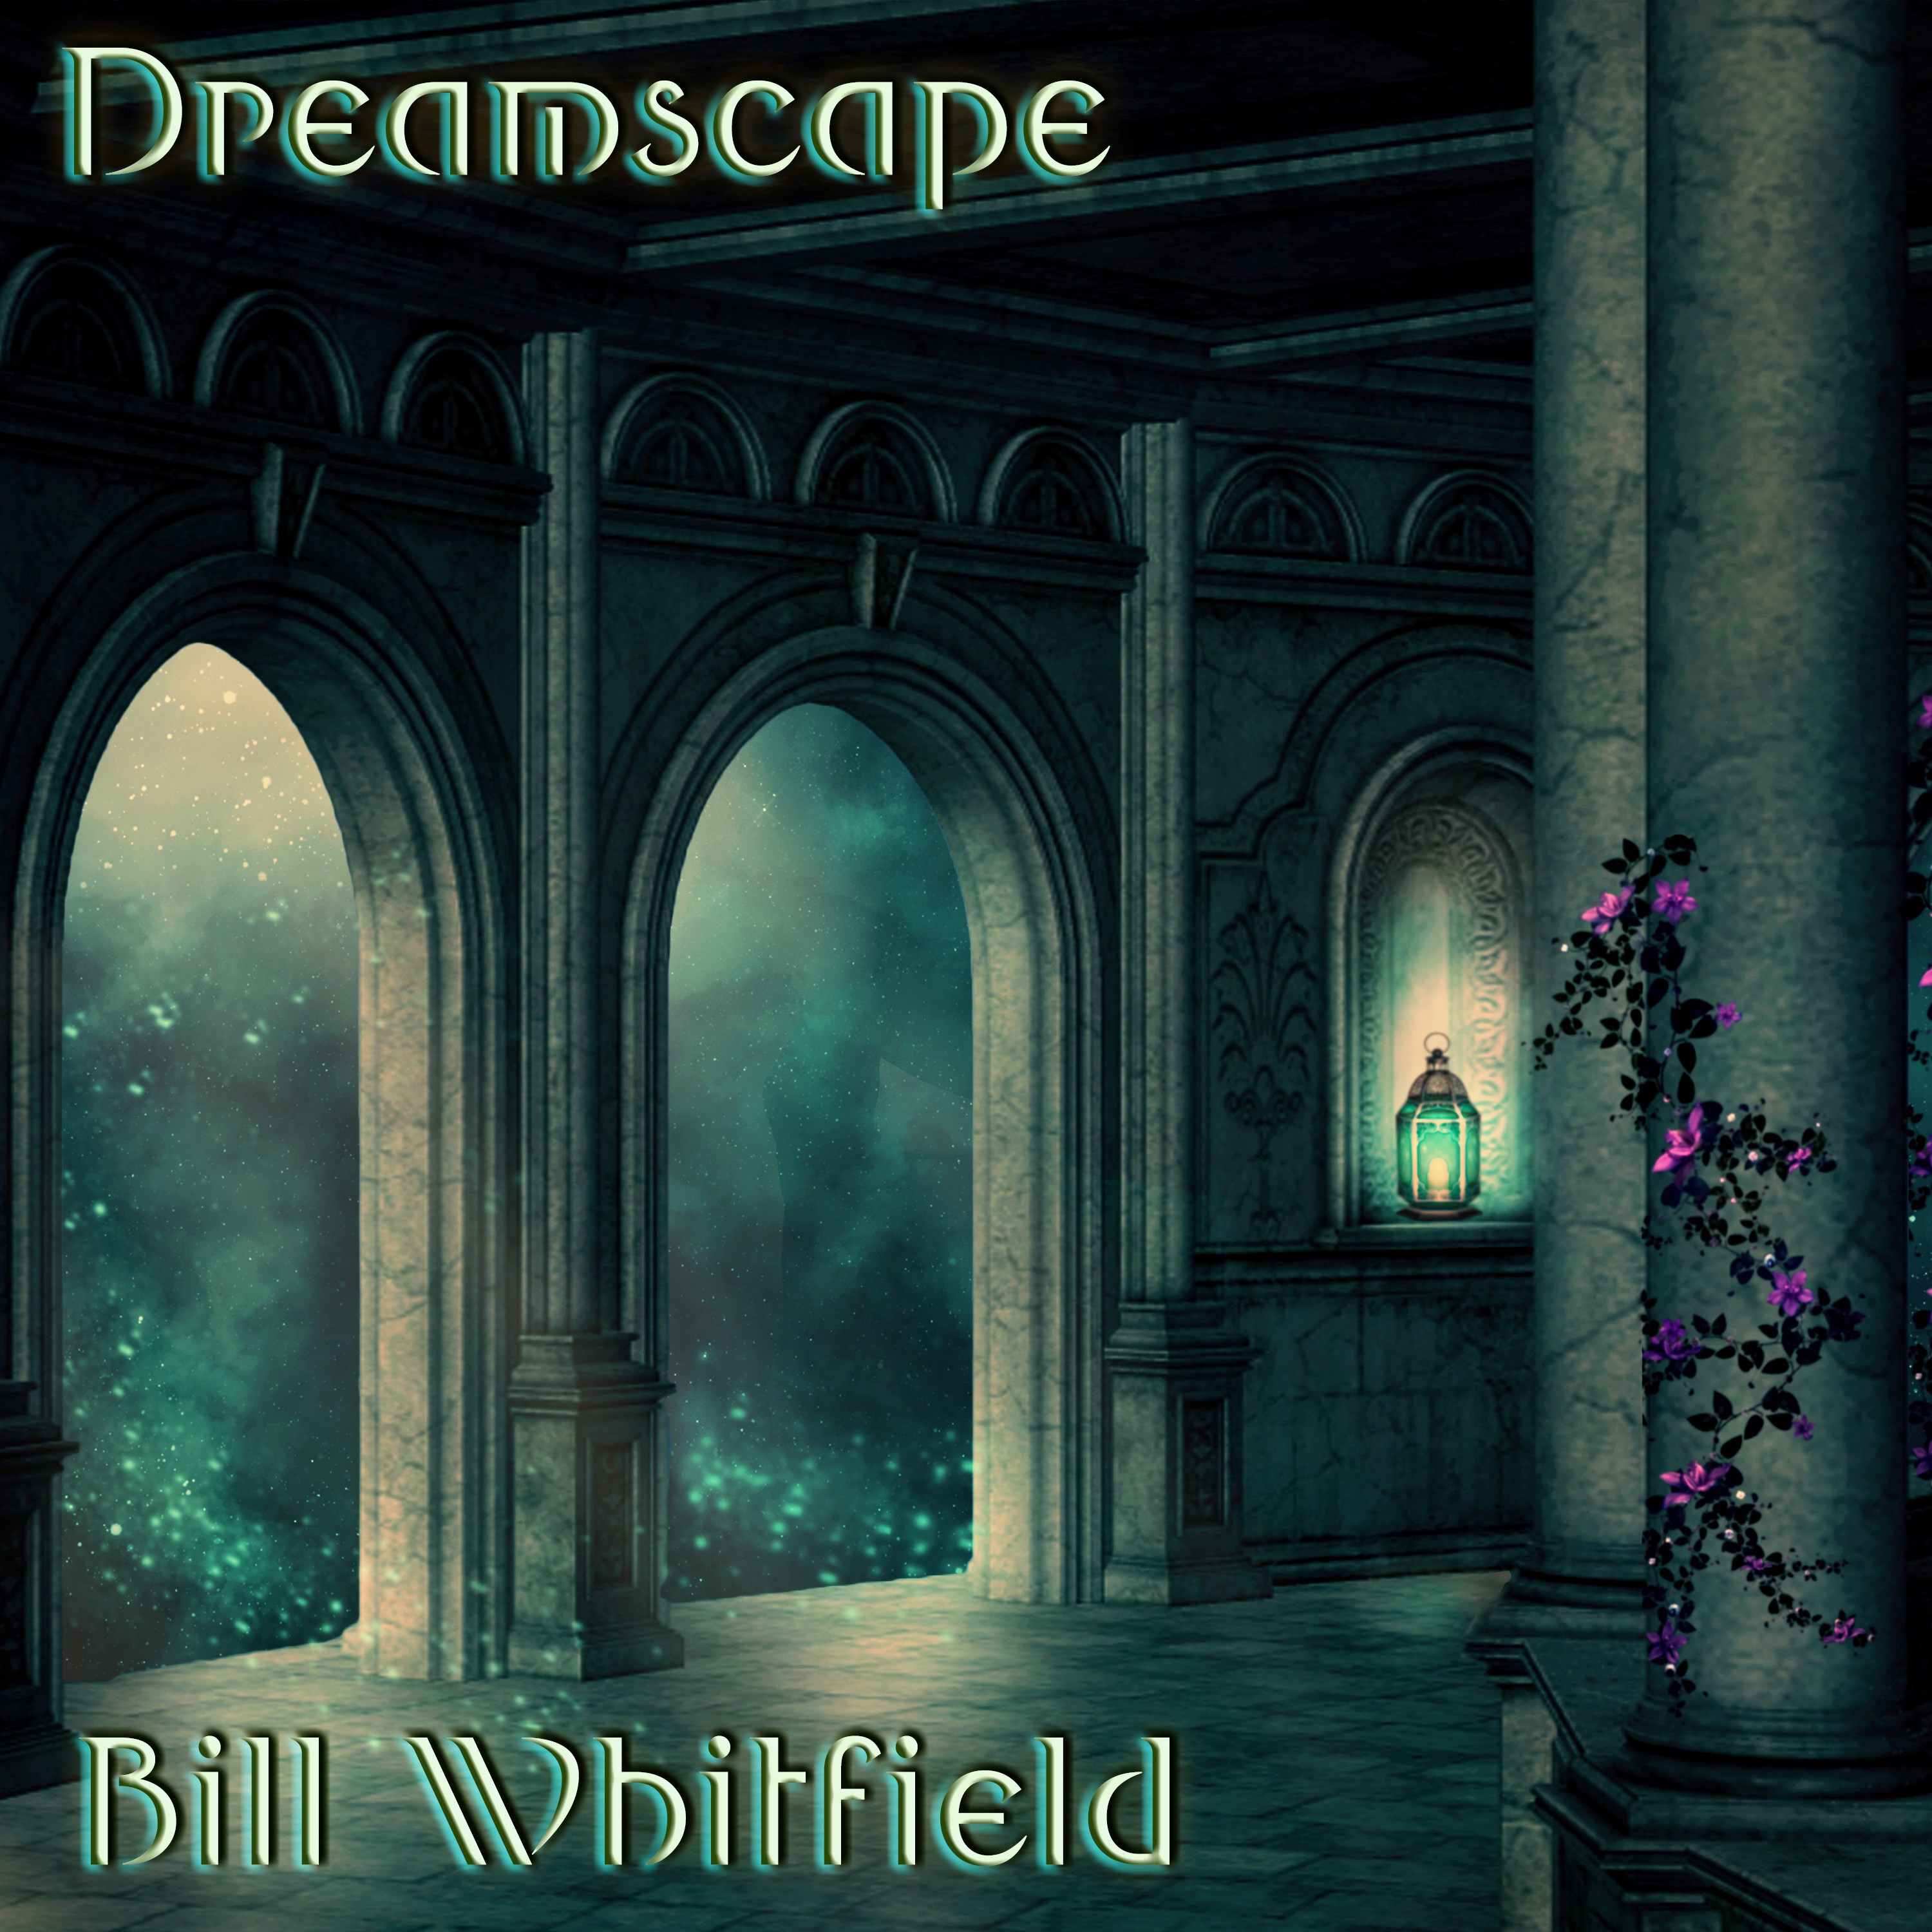 Art for Dreamscape by Bill Whitfield